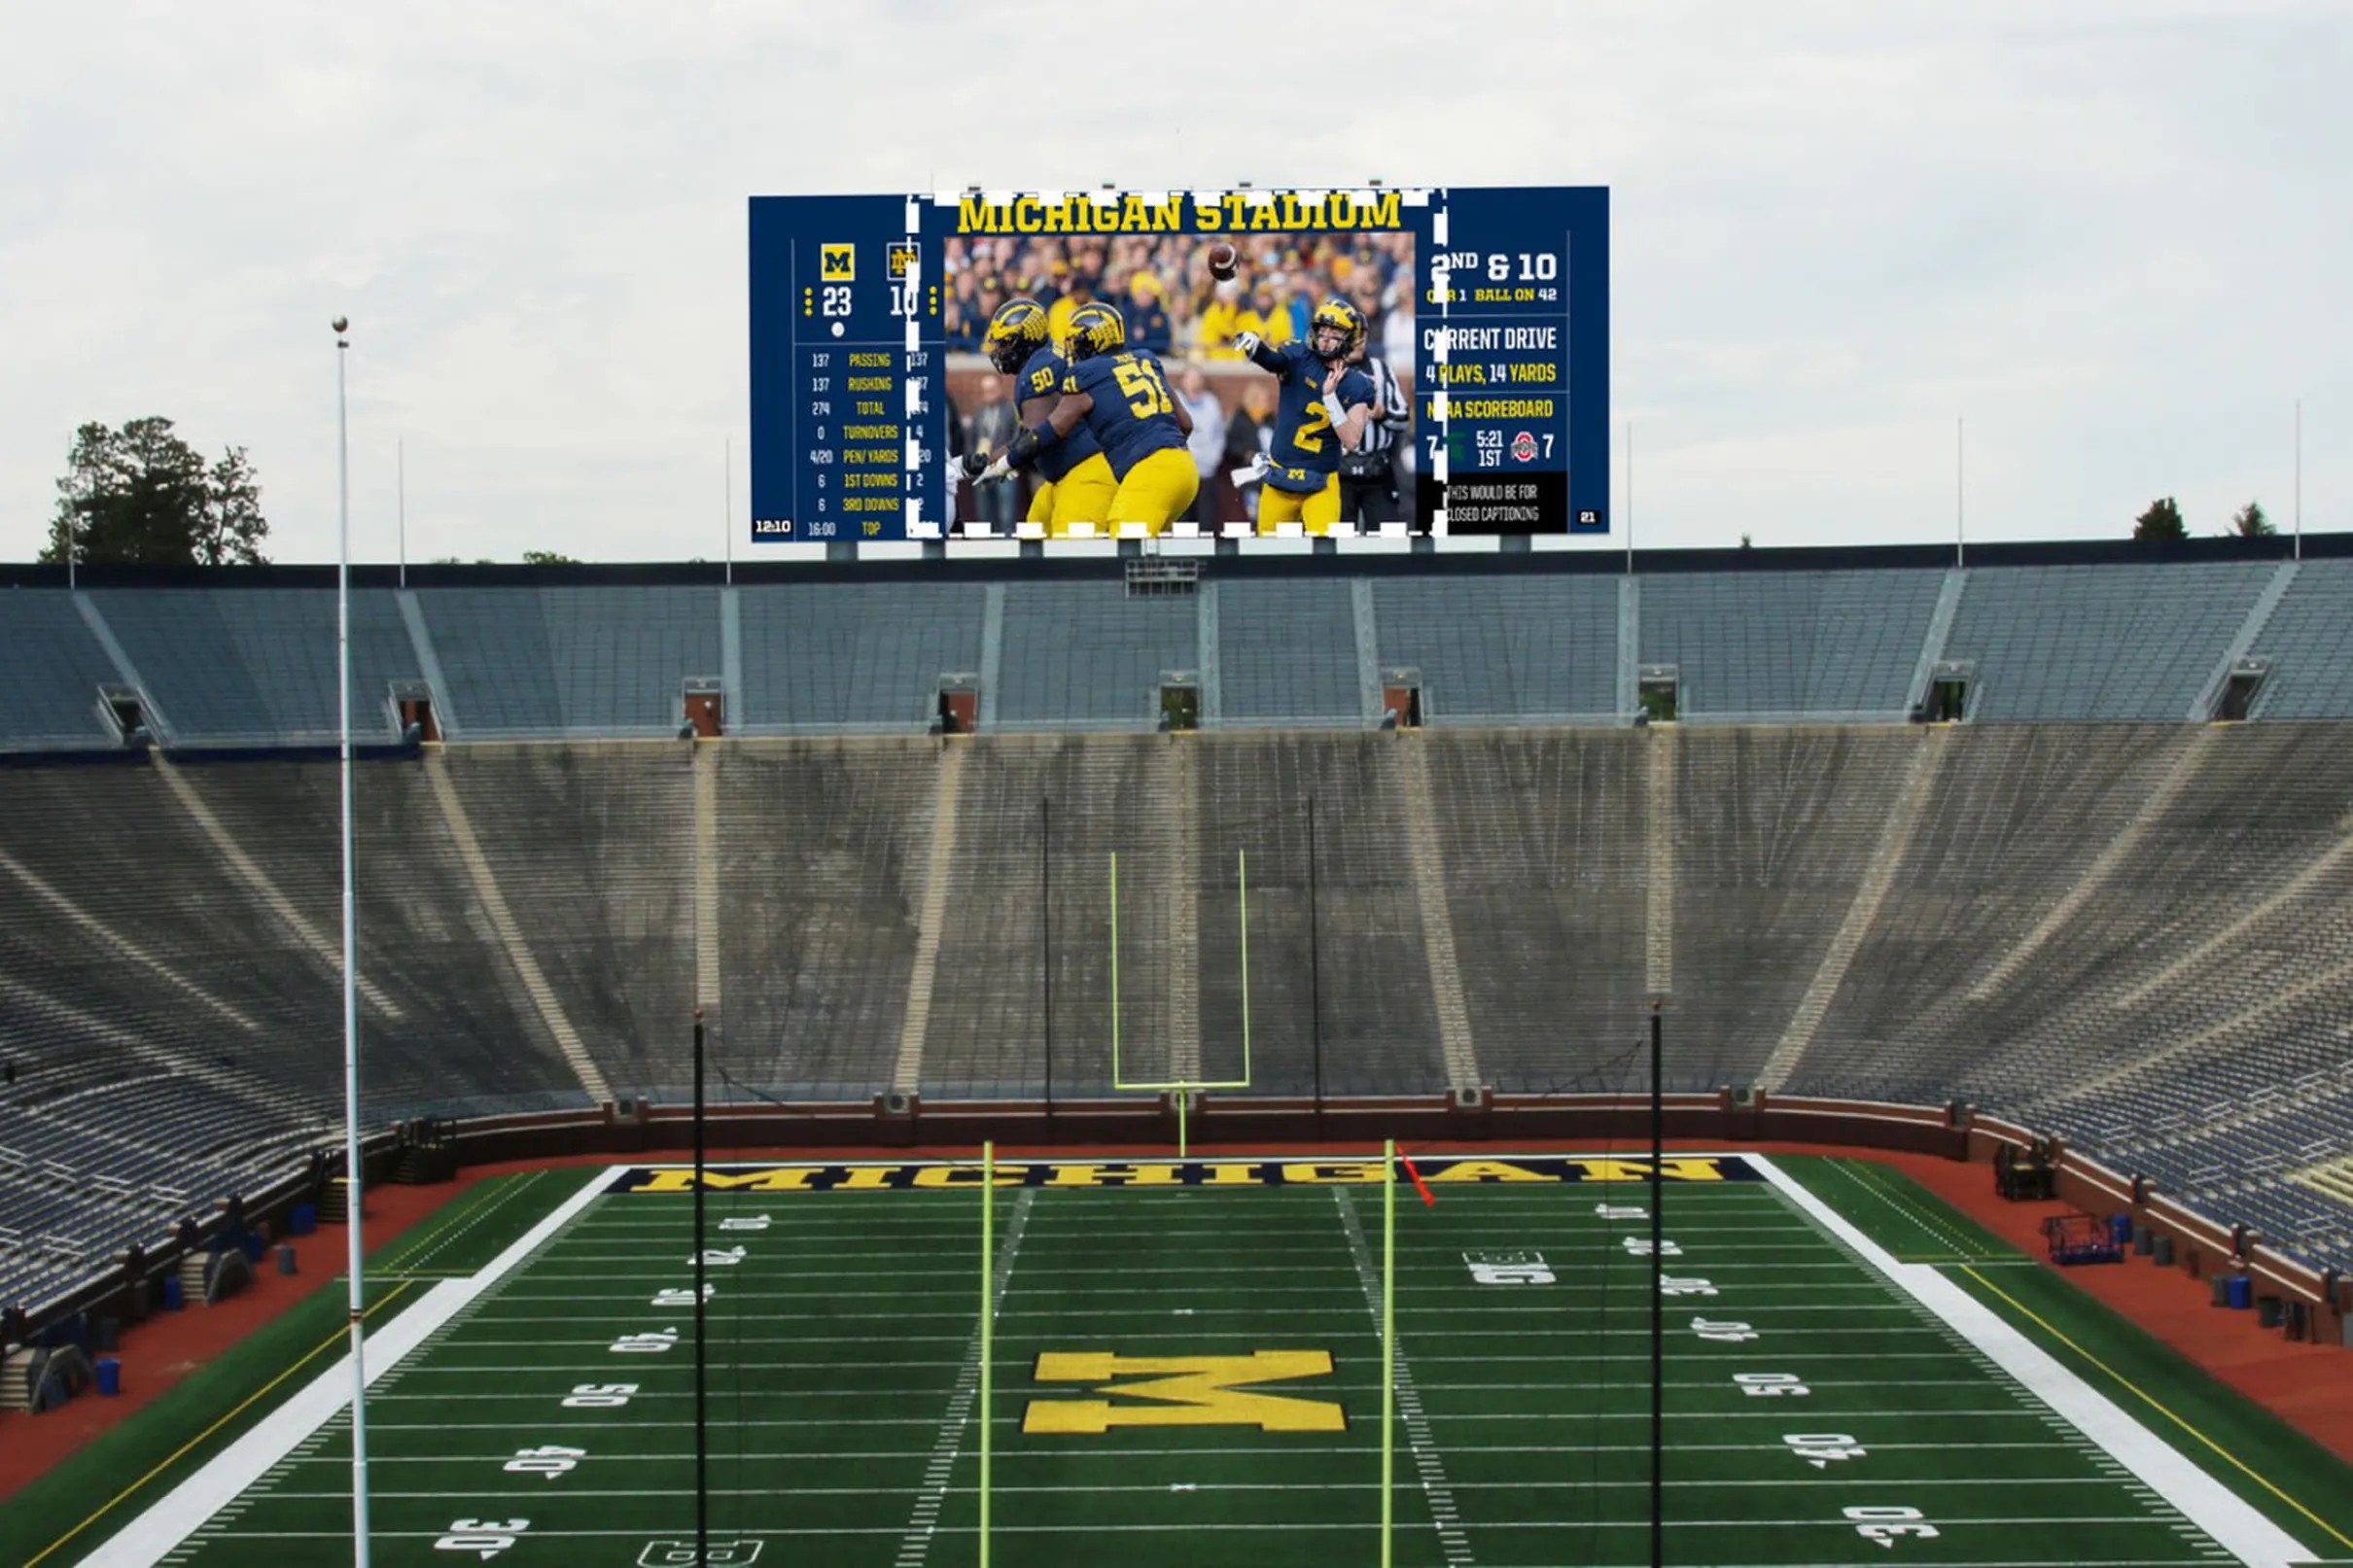 UM announces upgrades to the Big House, reveals renderings for new